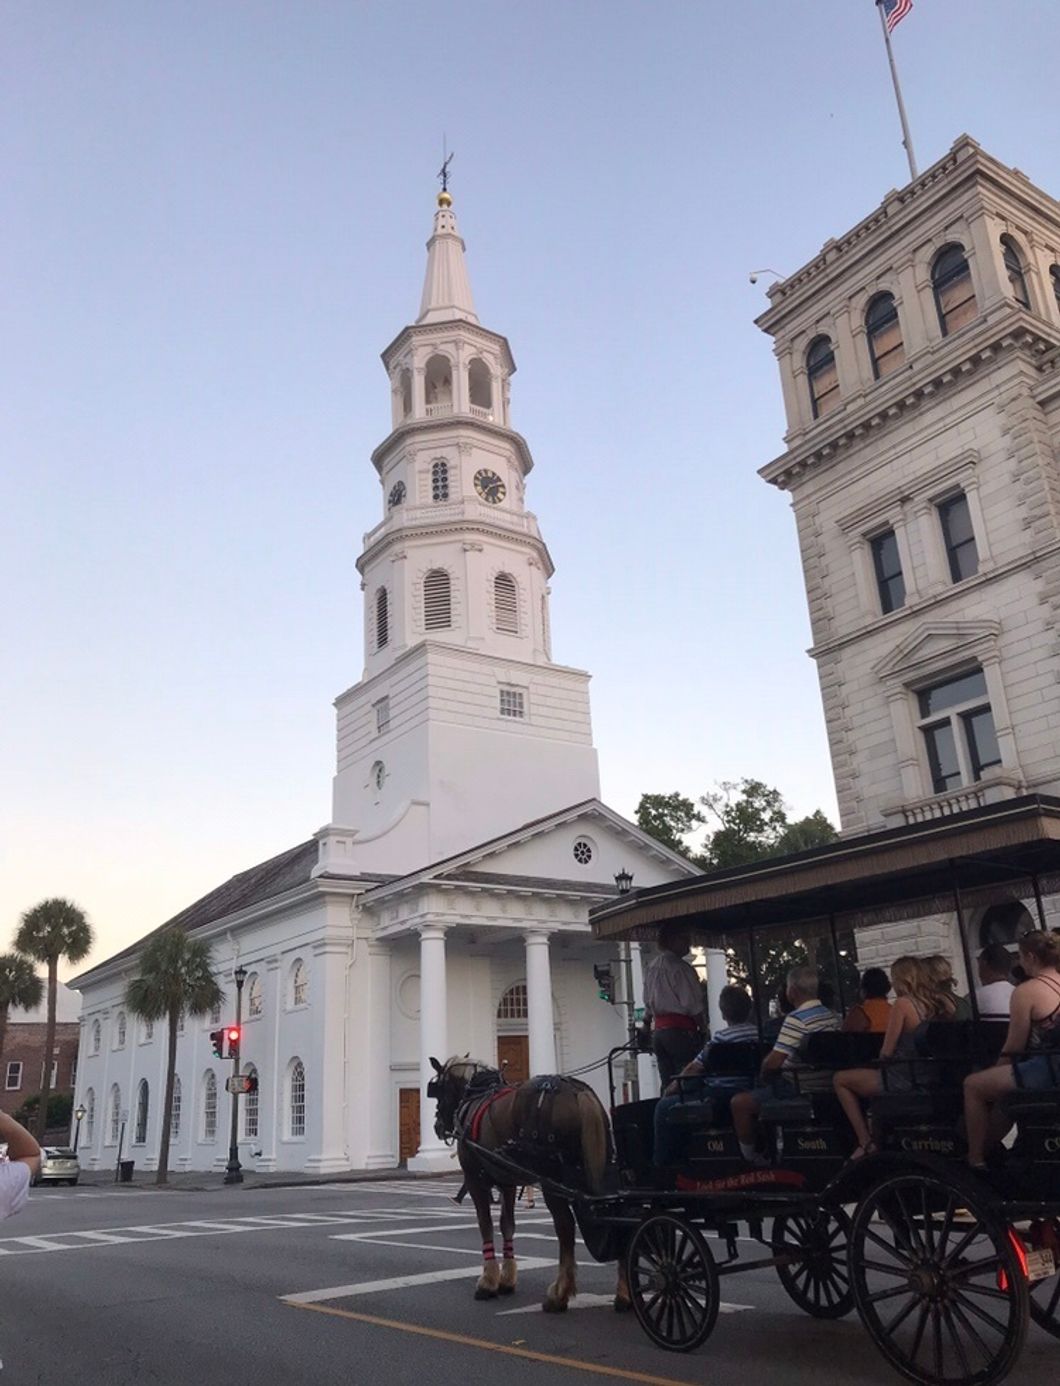 9 Things I'll Miss About Charleston While Home For The Summer